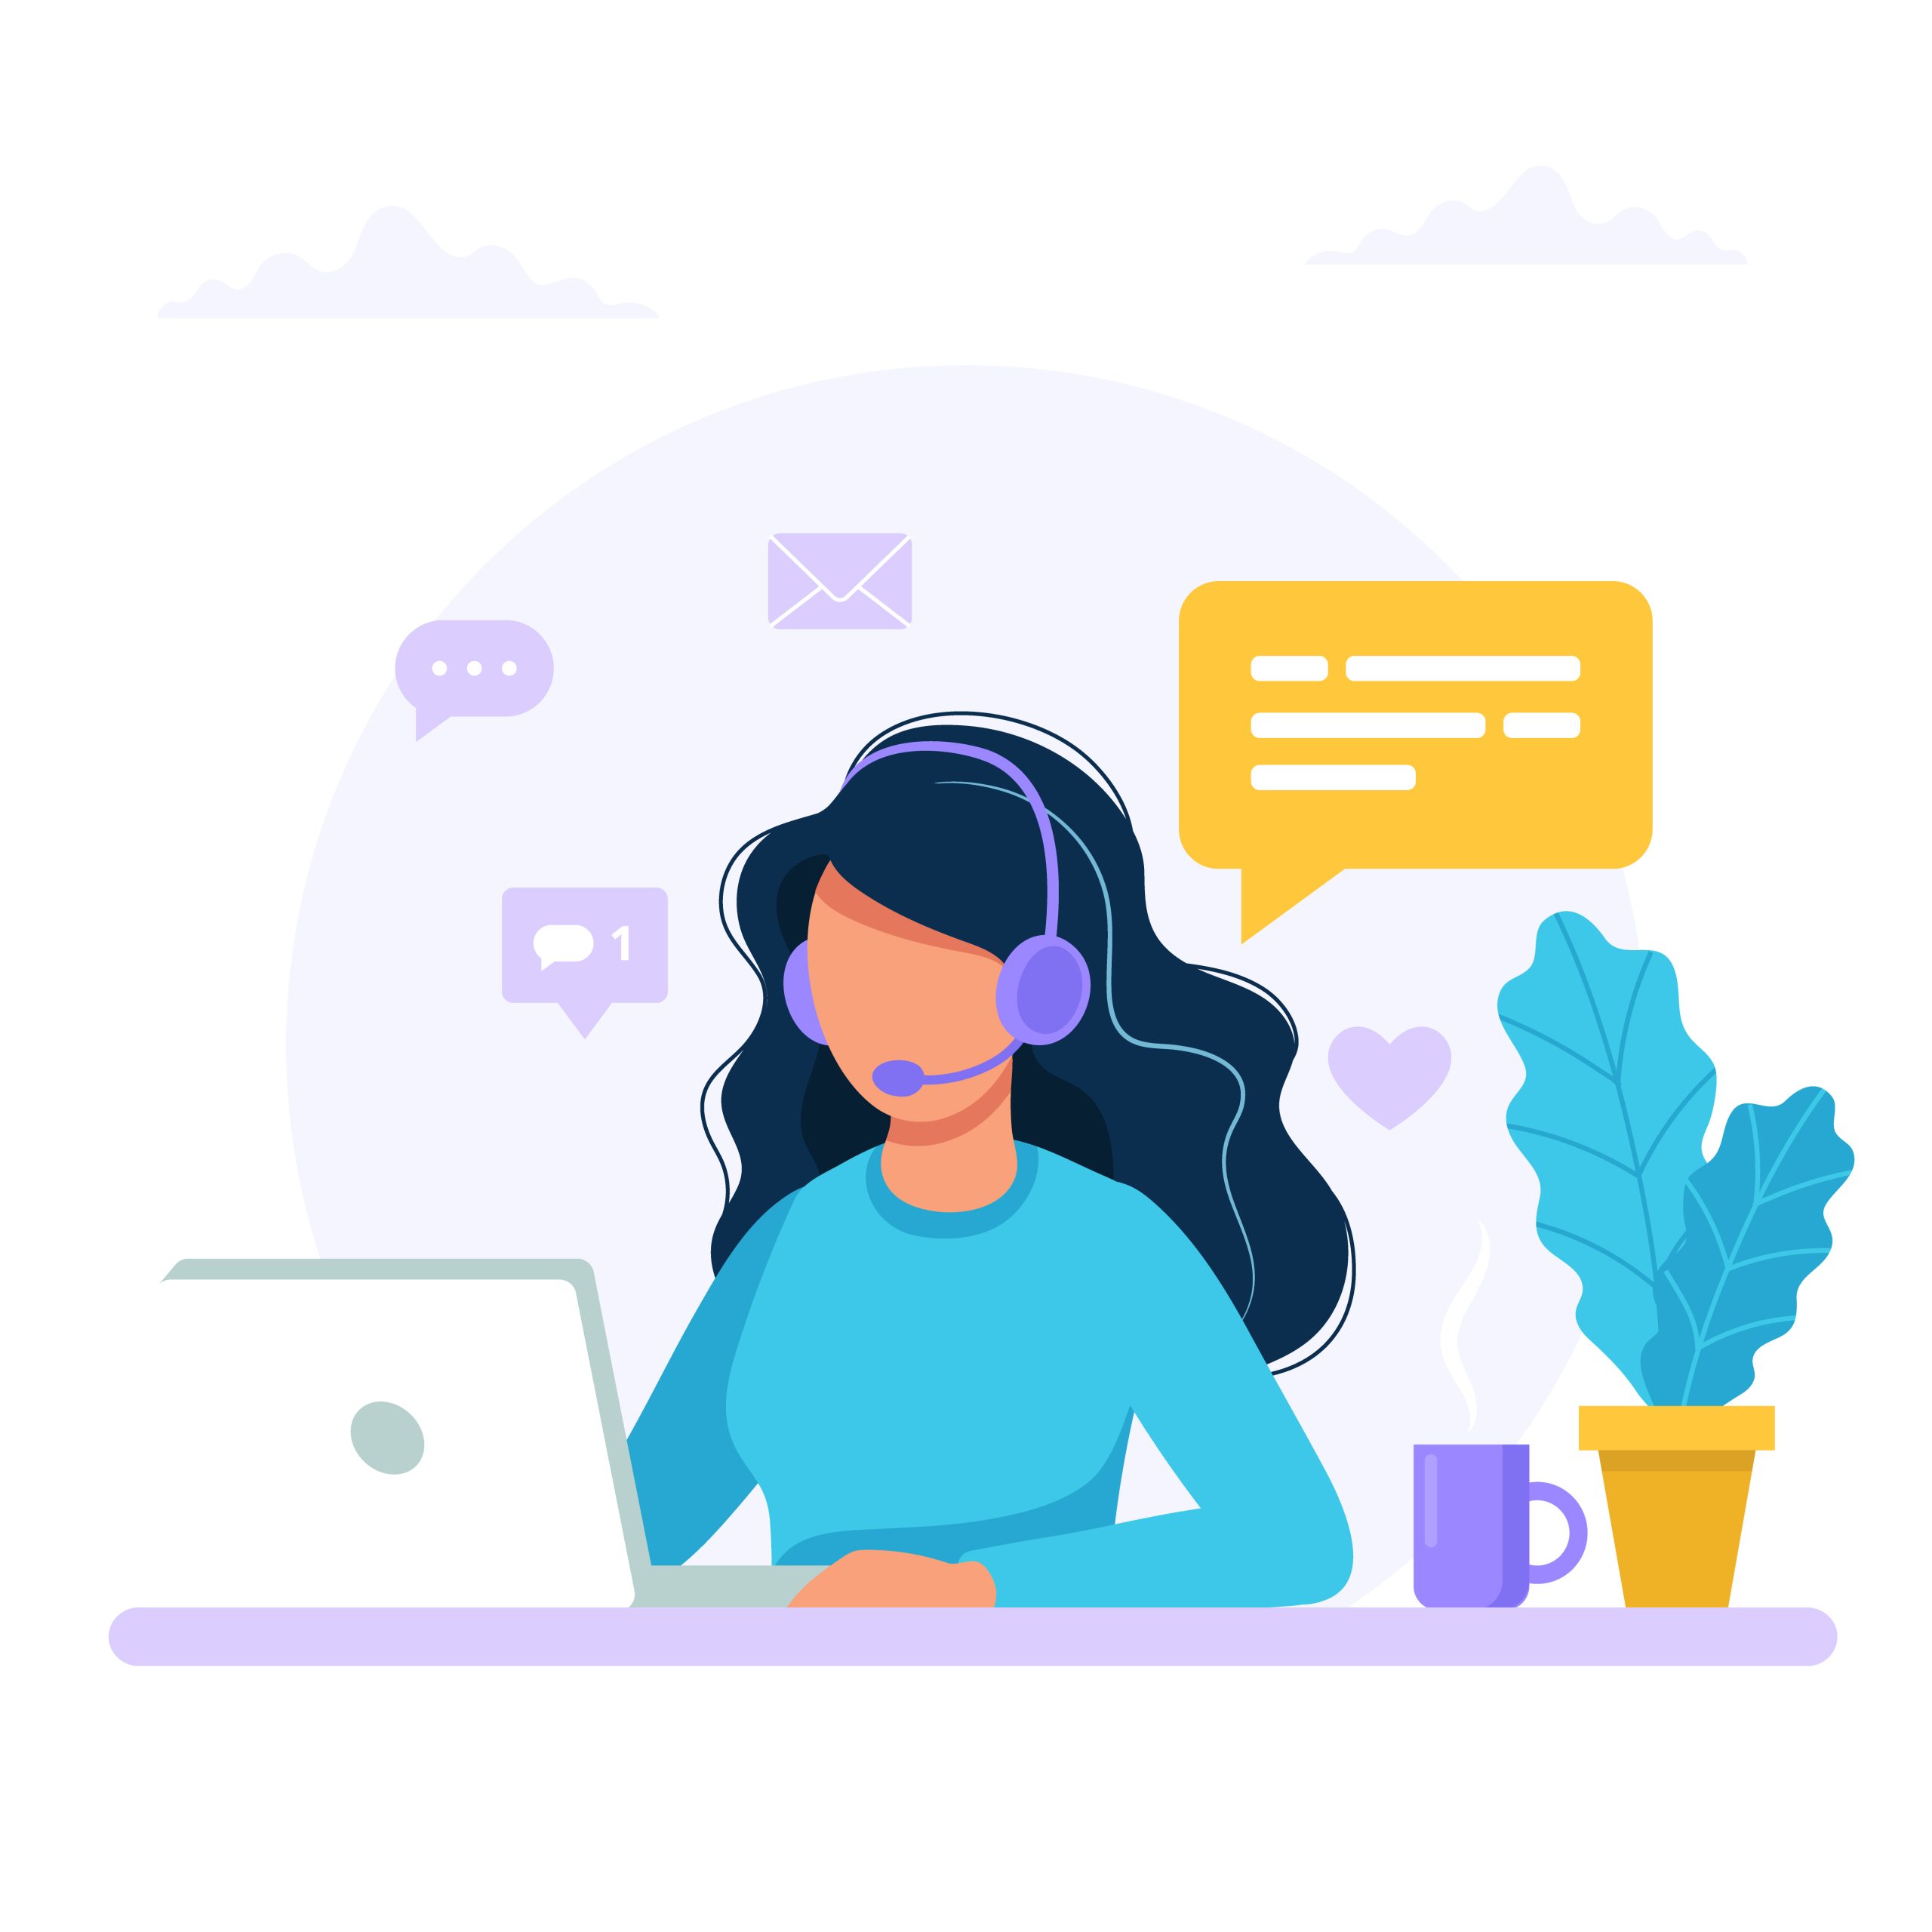 Contact us. Woman with headphones and microphone with computer. Concept illustration for support, assistance, call center. Vector illustration in flat style